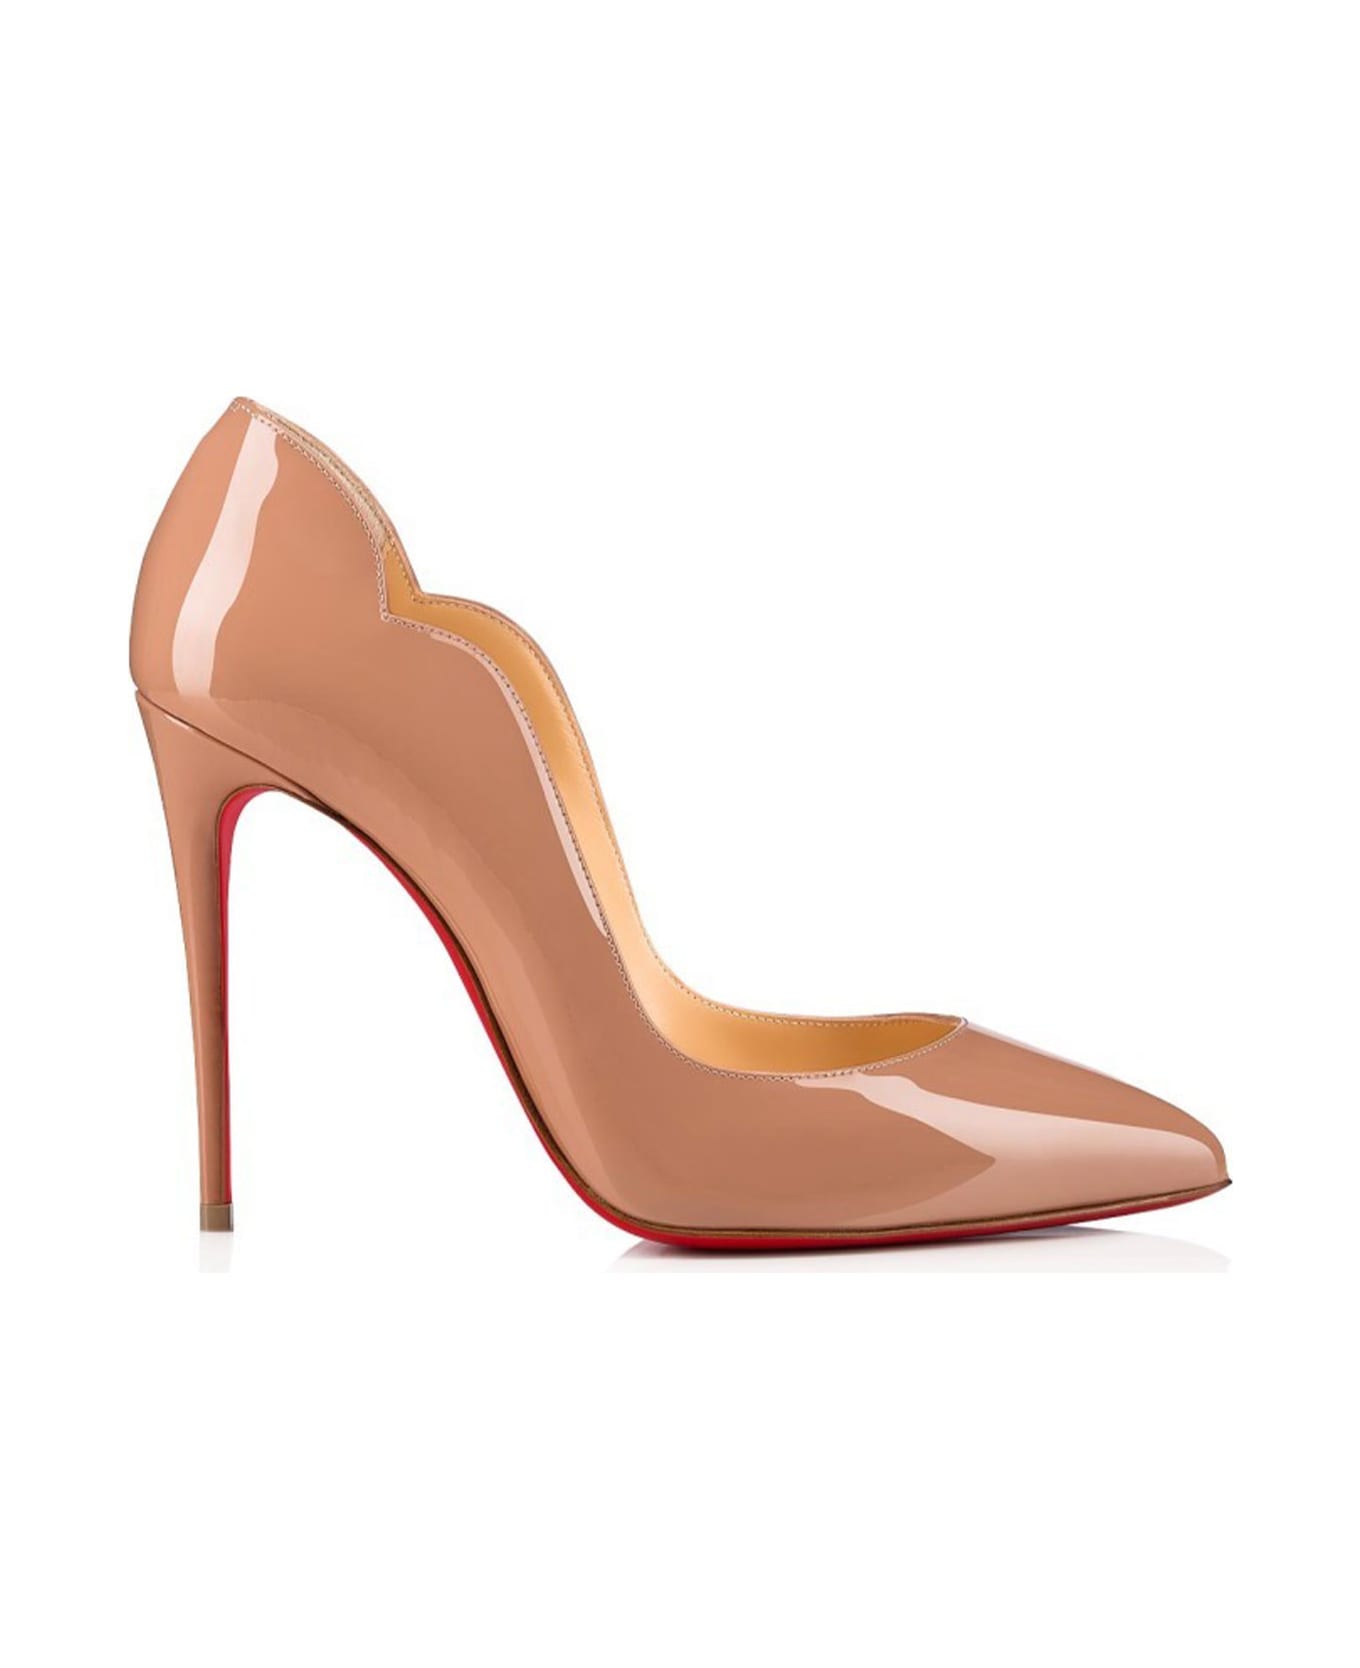 Christian Louboutin Hot Chick Décolleté In Nude Leather - NUDE